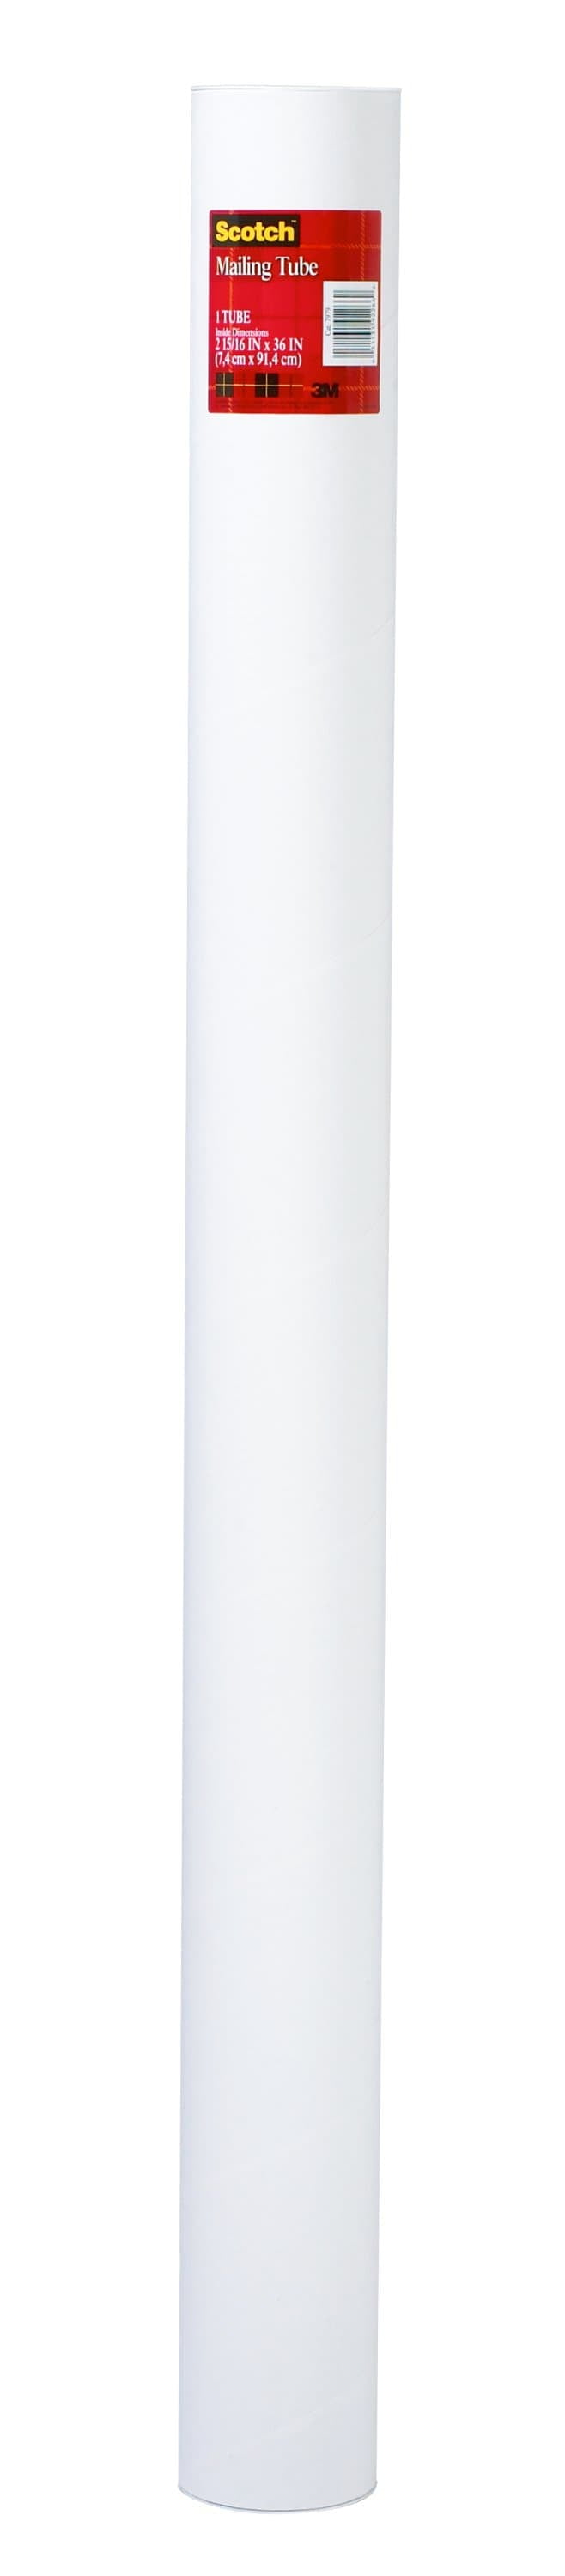 Scotch Mailing Tube, 2-15/16 Inches x 36 Inches (7979)